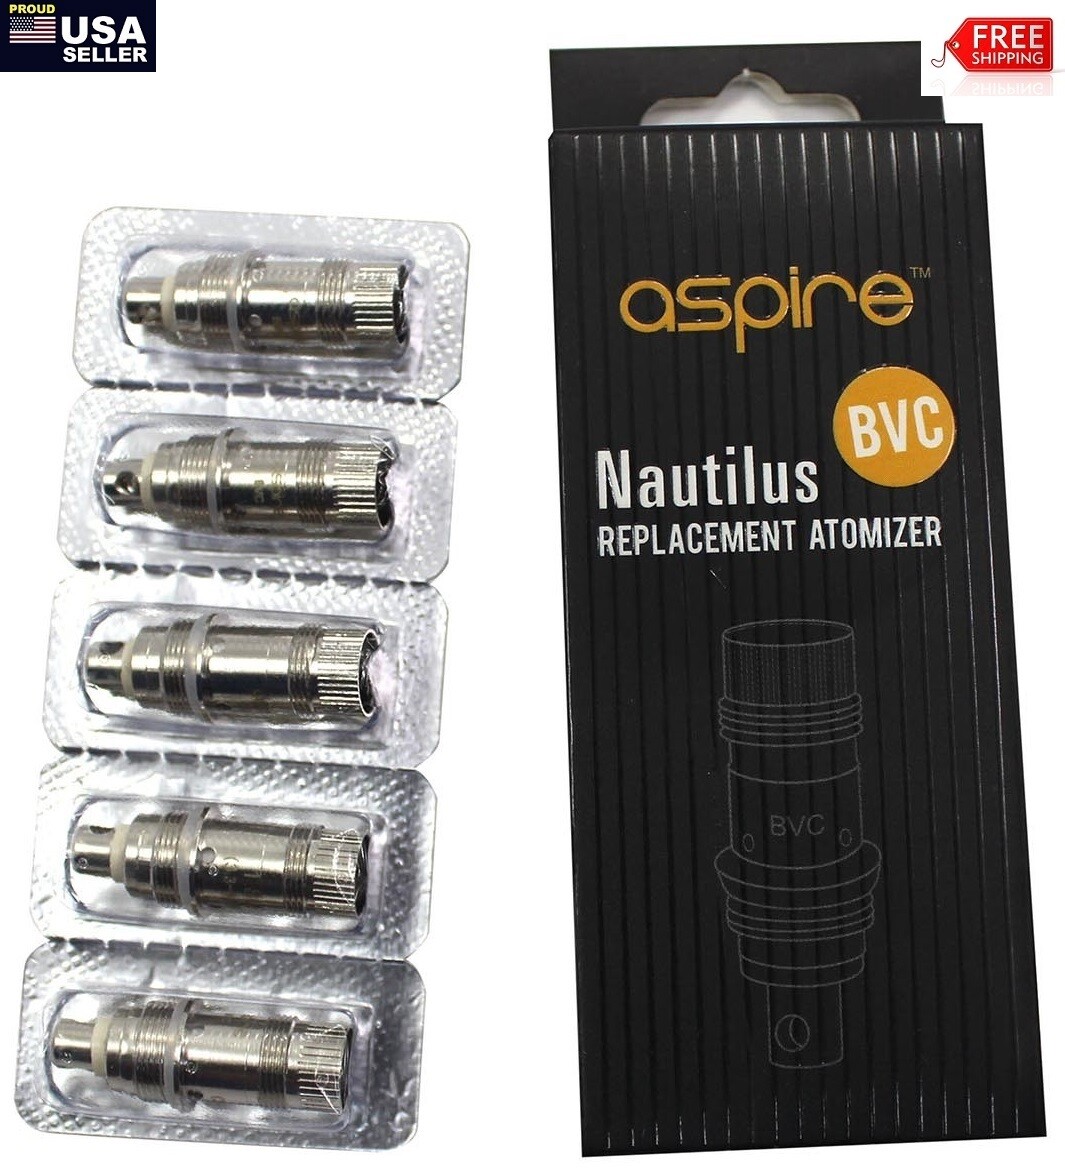 Aspire Nautilus Coils 2.1 Ohm. BVC Replacement. Fits Nautilus 2 and 2S. 10 Coils (2 packs of 5 each)